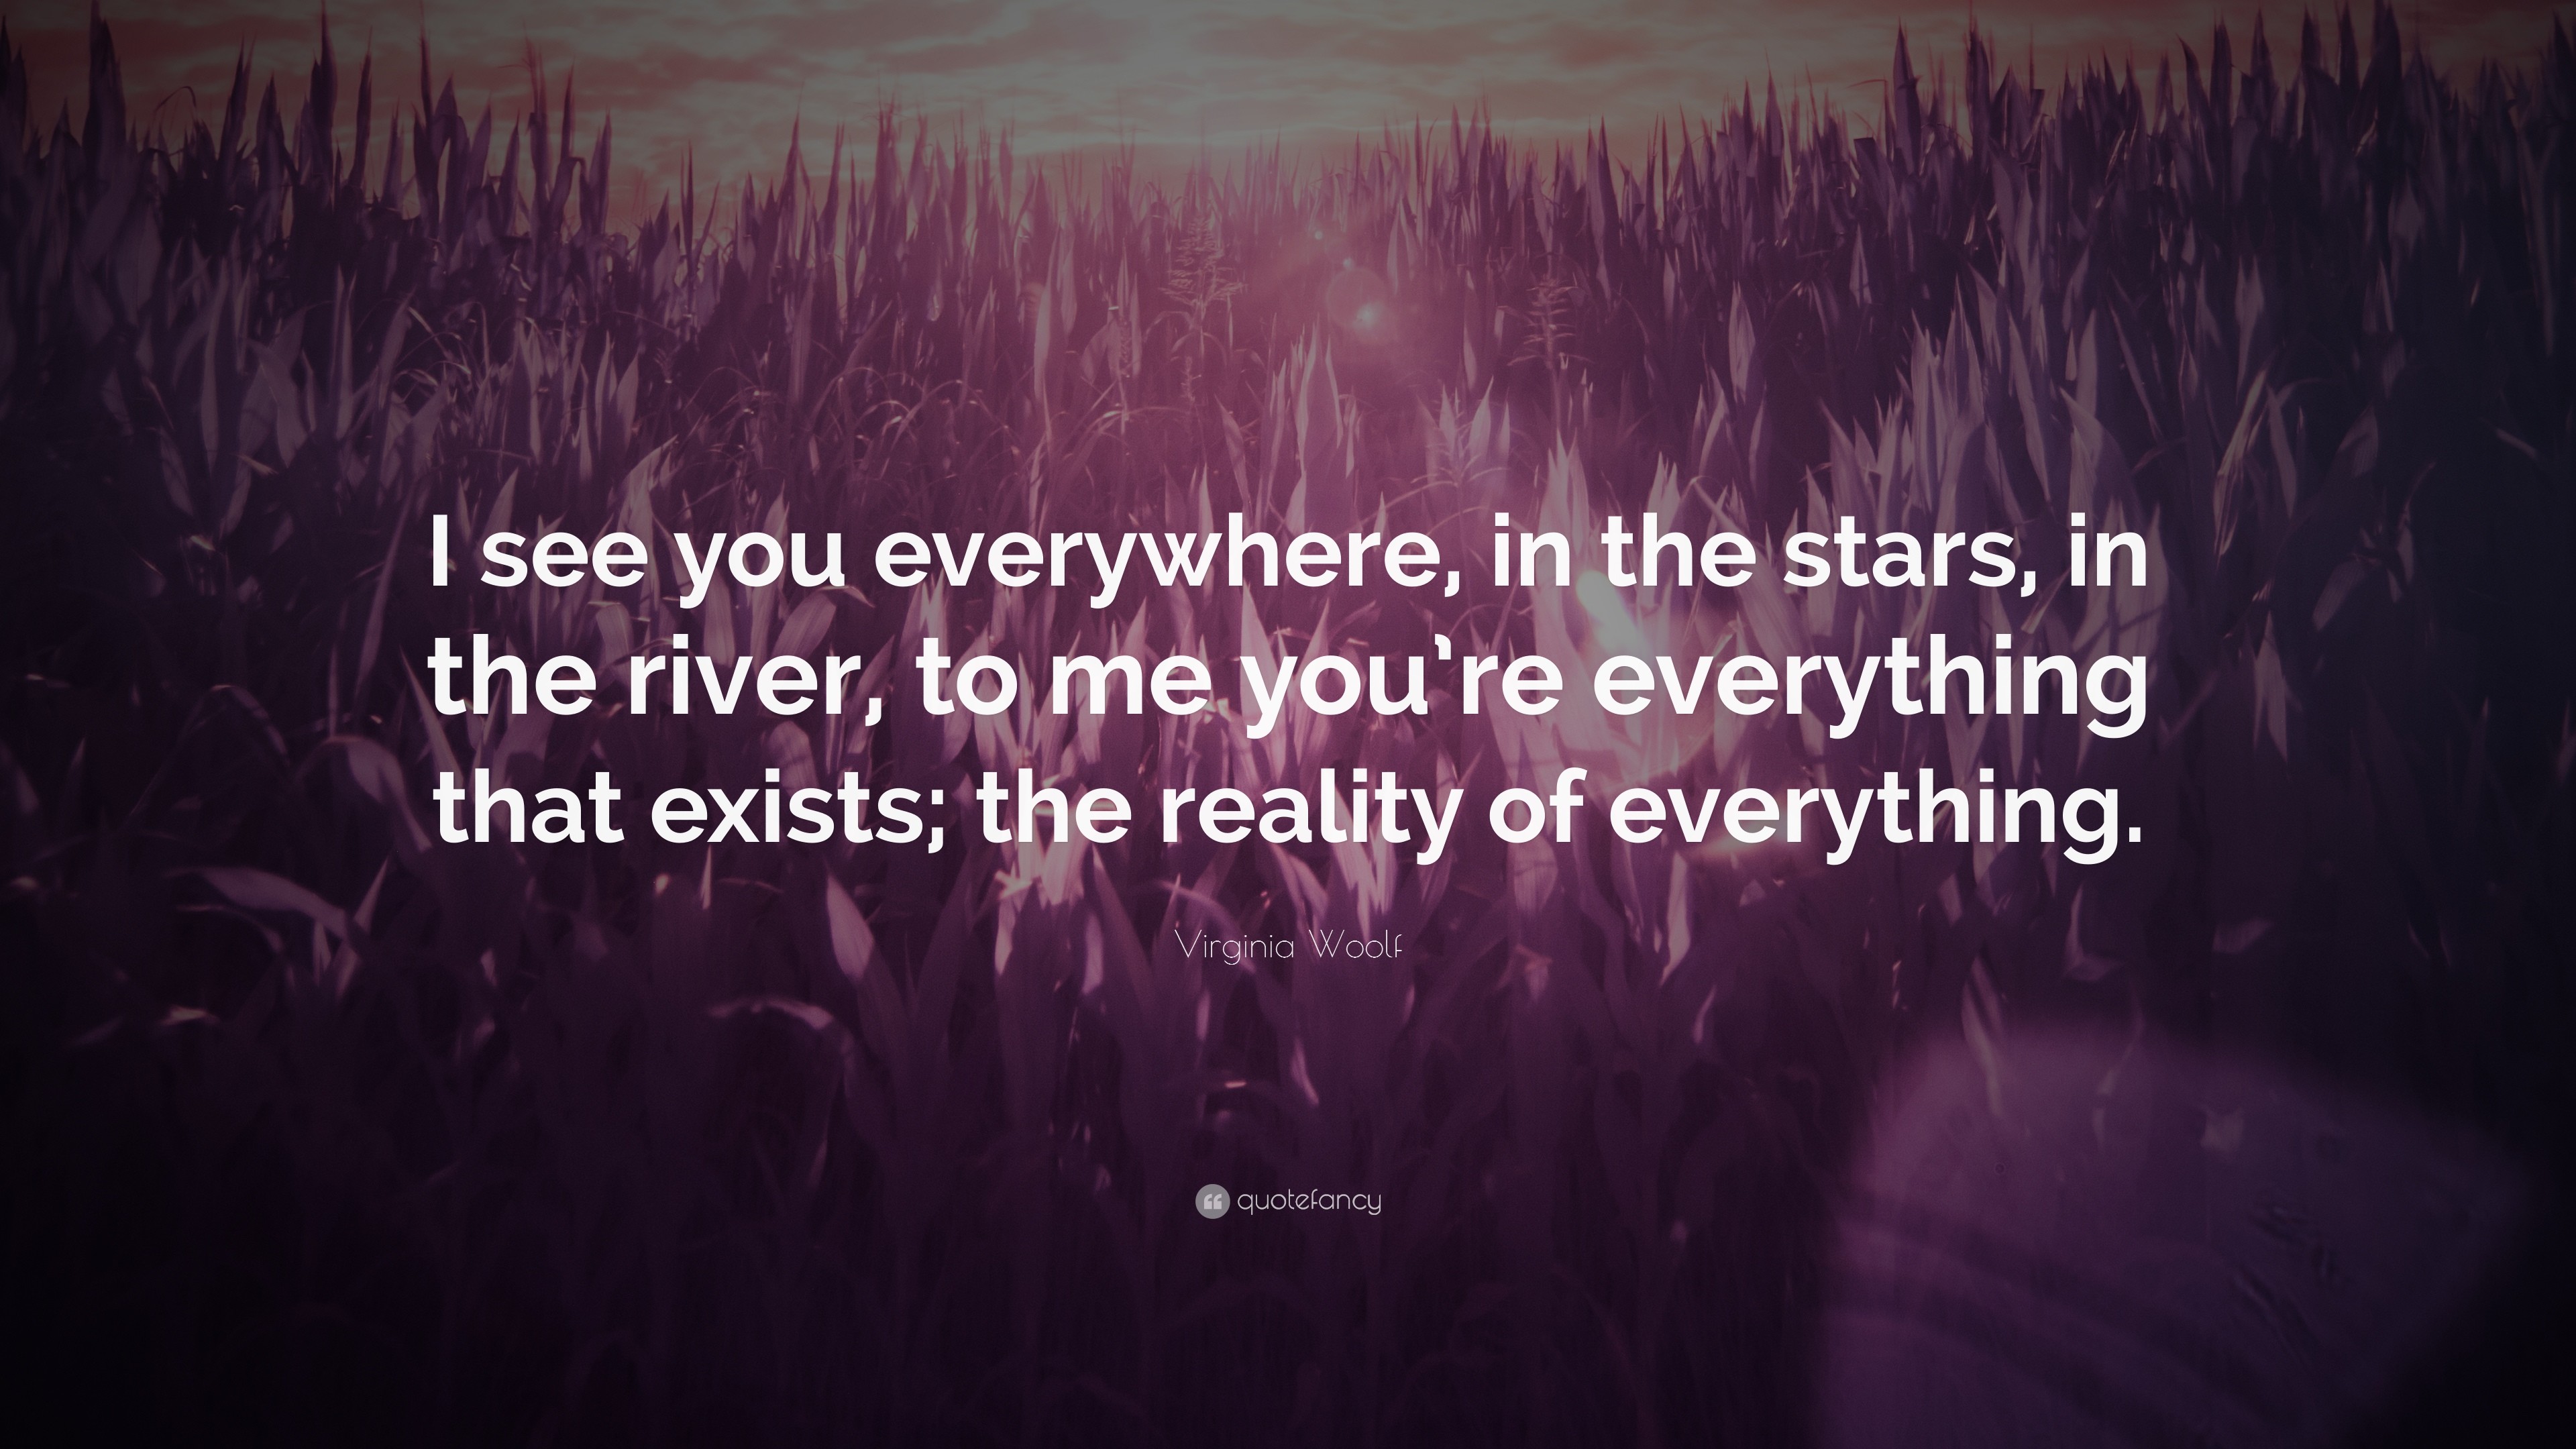 3840x2160 Virginia Woolf Quote: “I see you everywhere, in the stars, in the